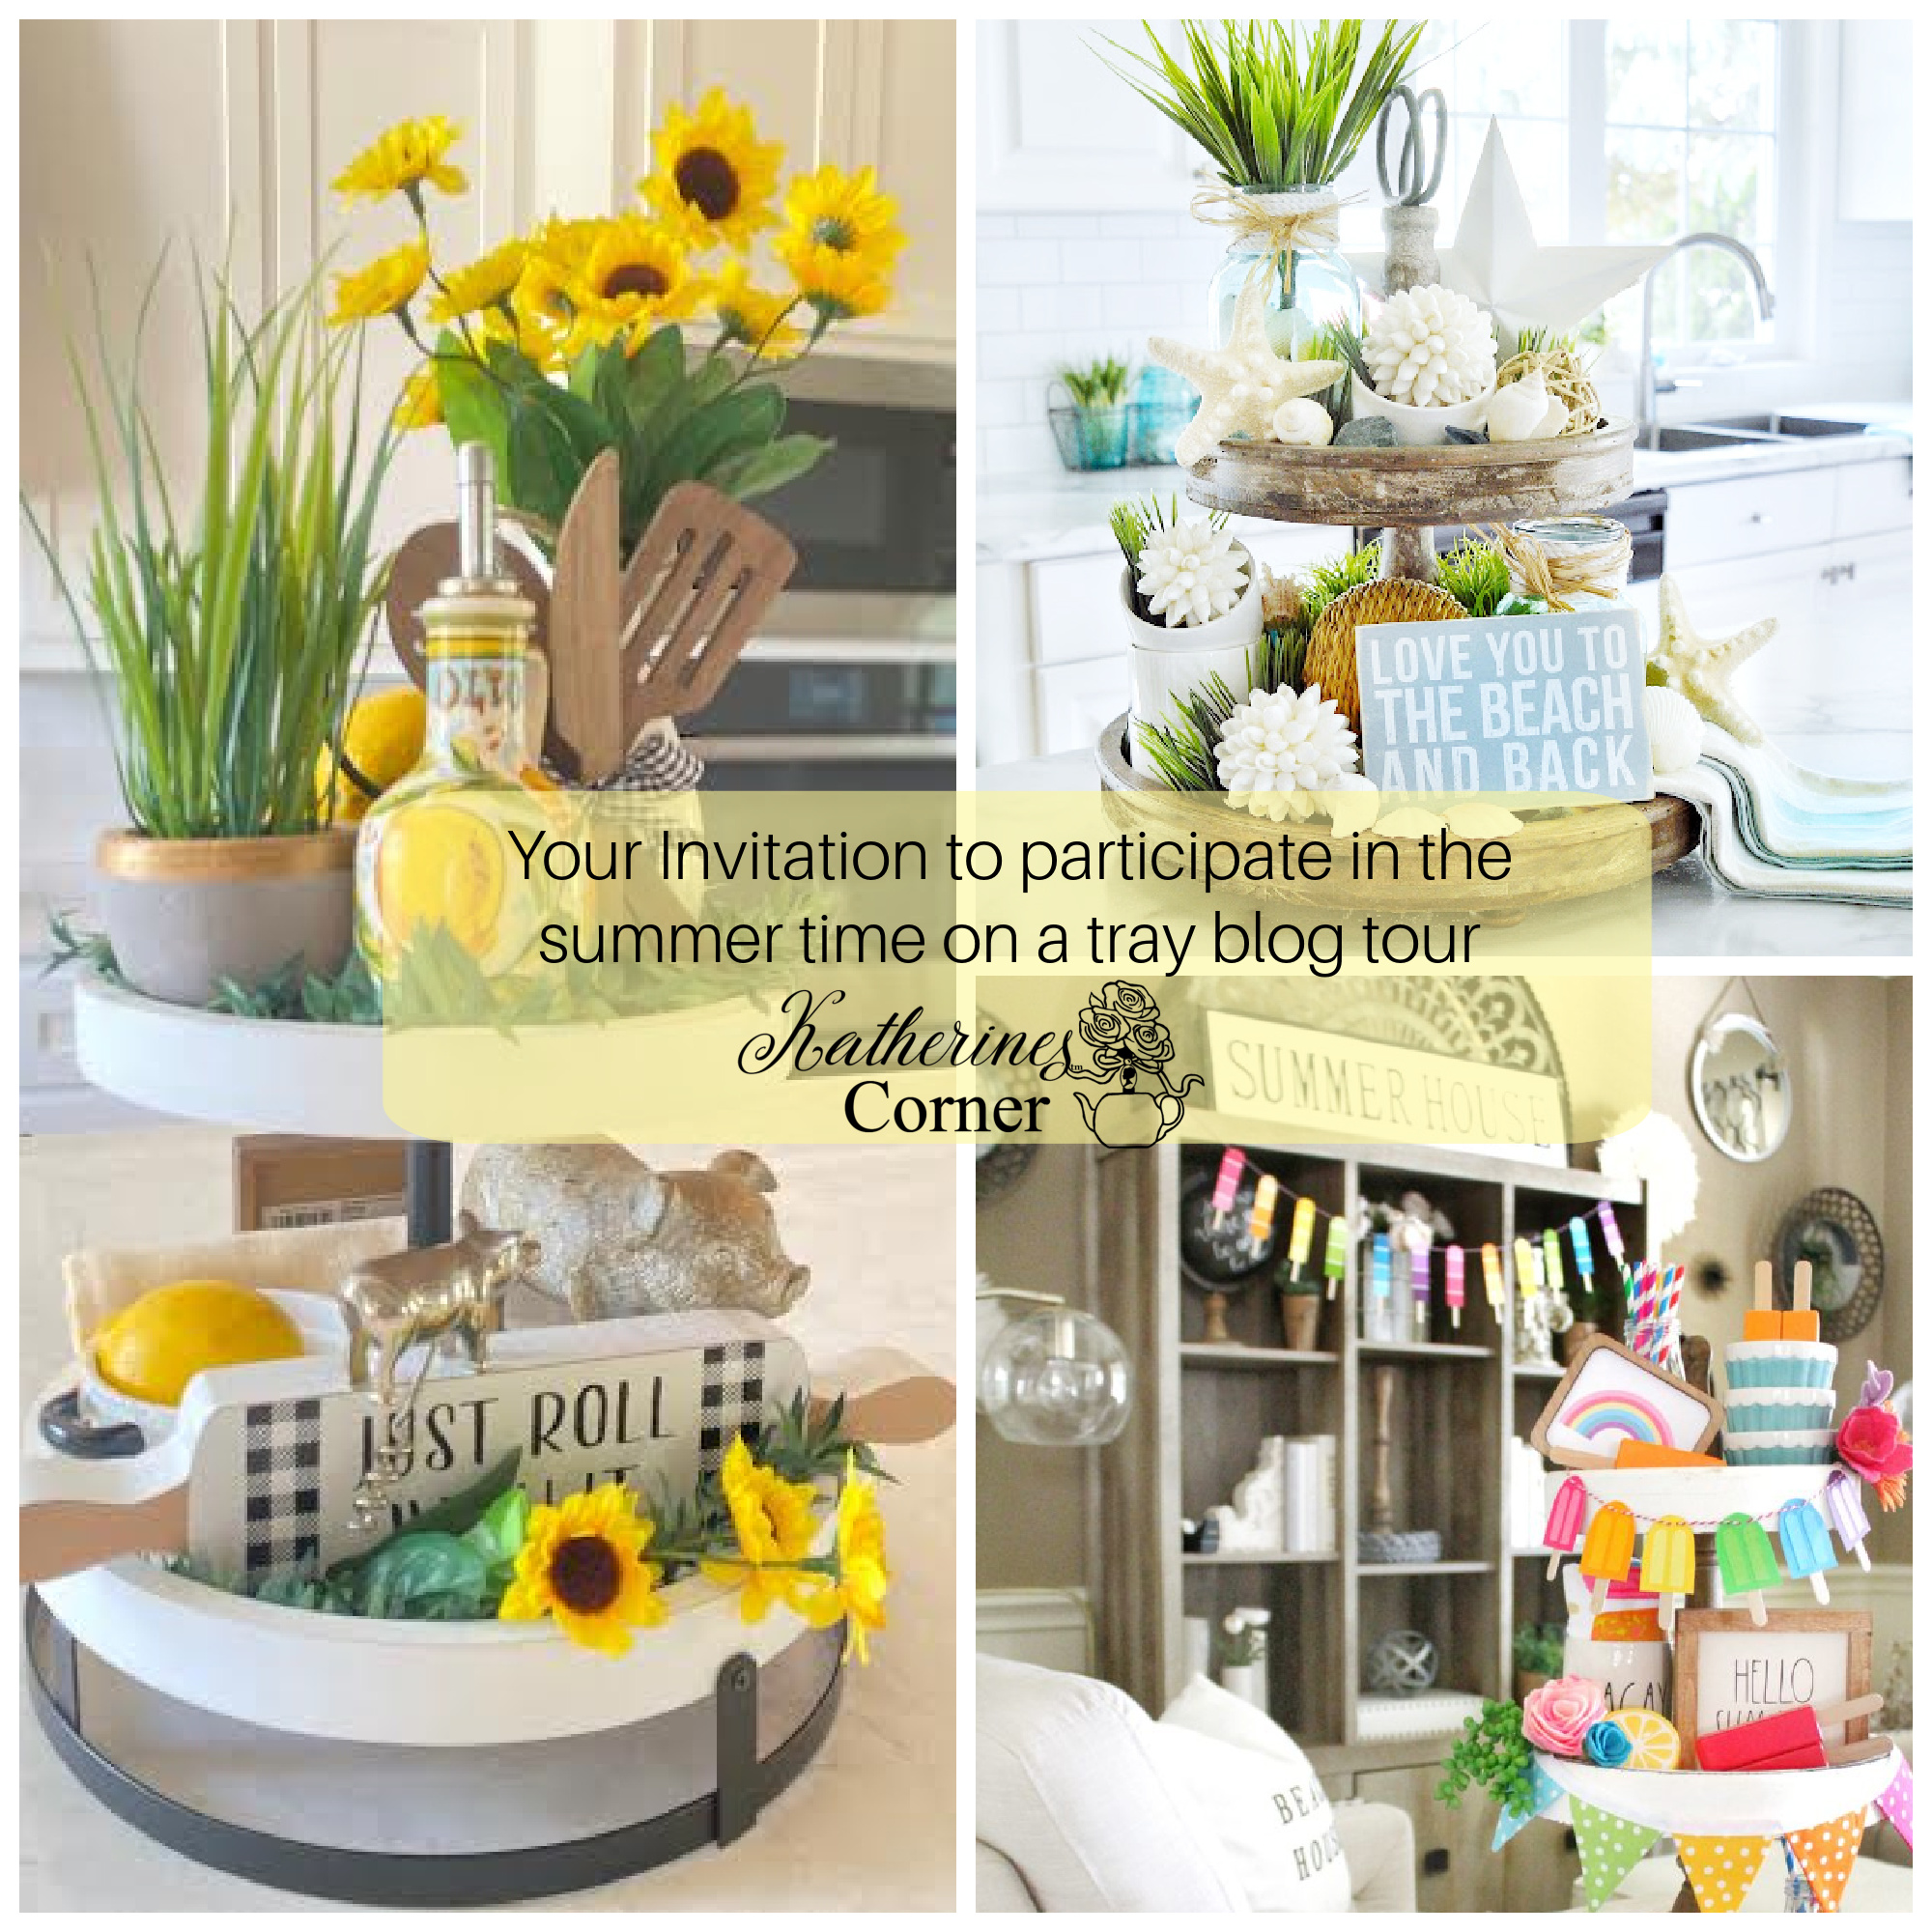 Your Invitation to Participate in the Summer Time on a Tray Blog Tour